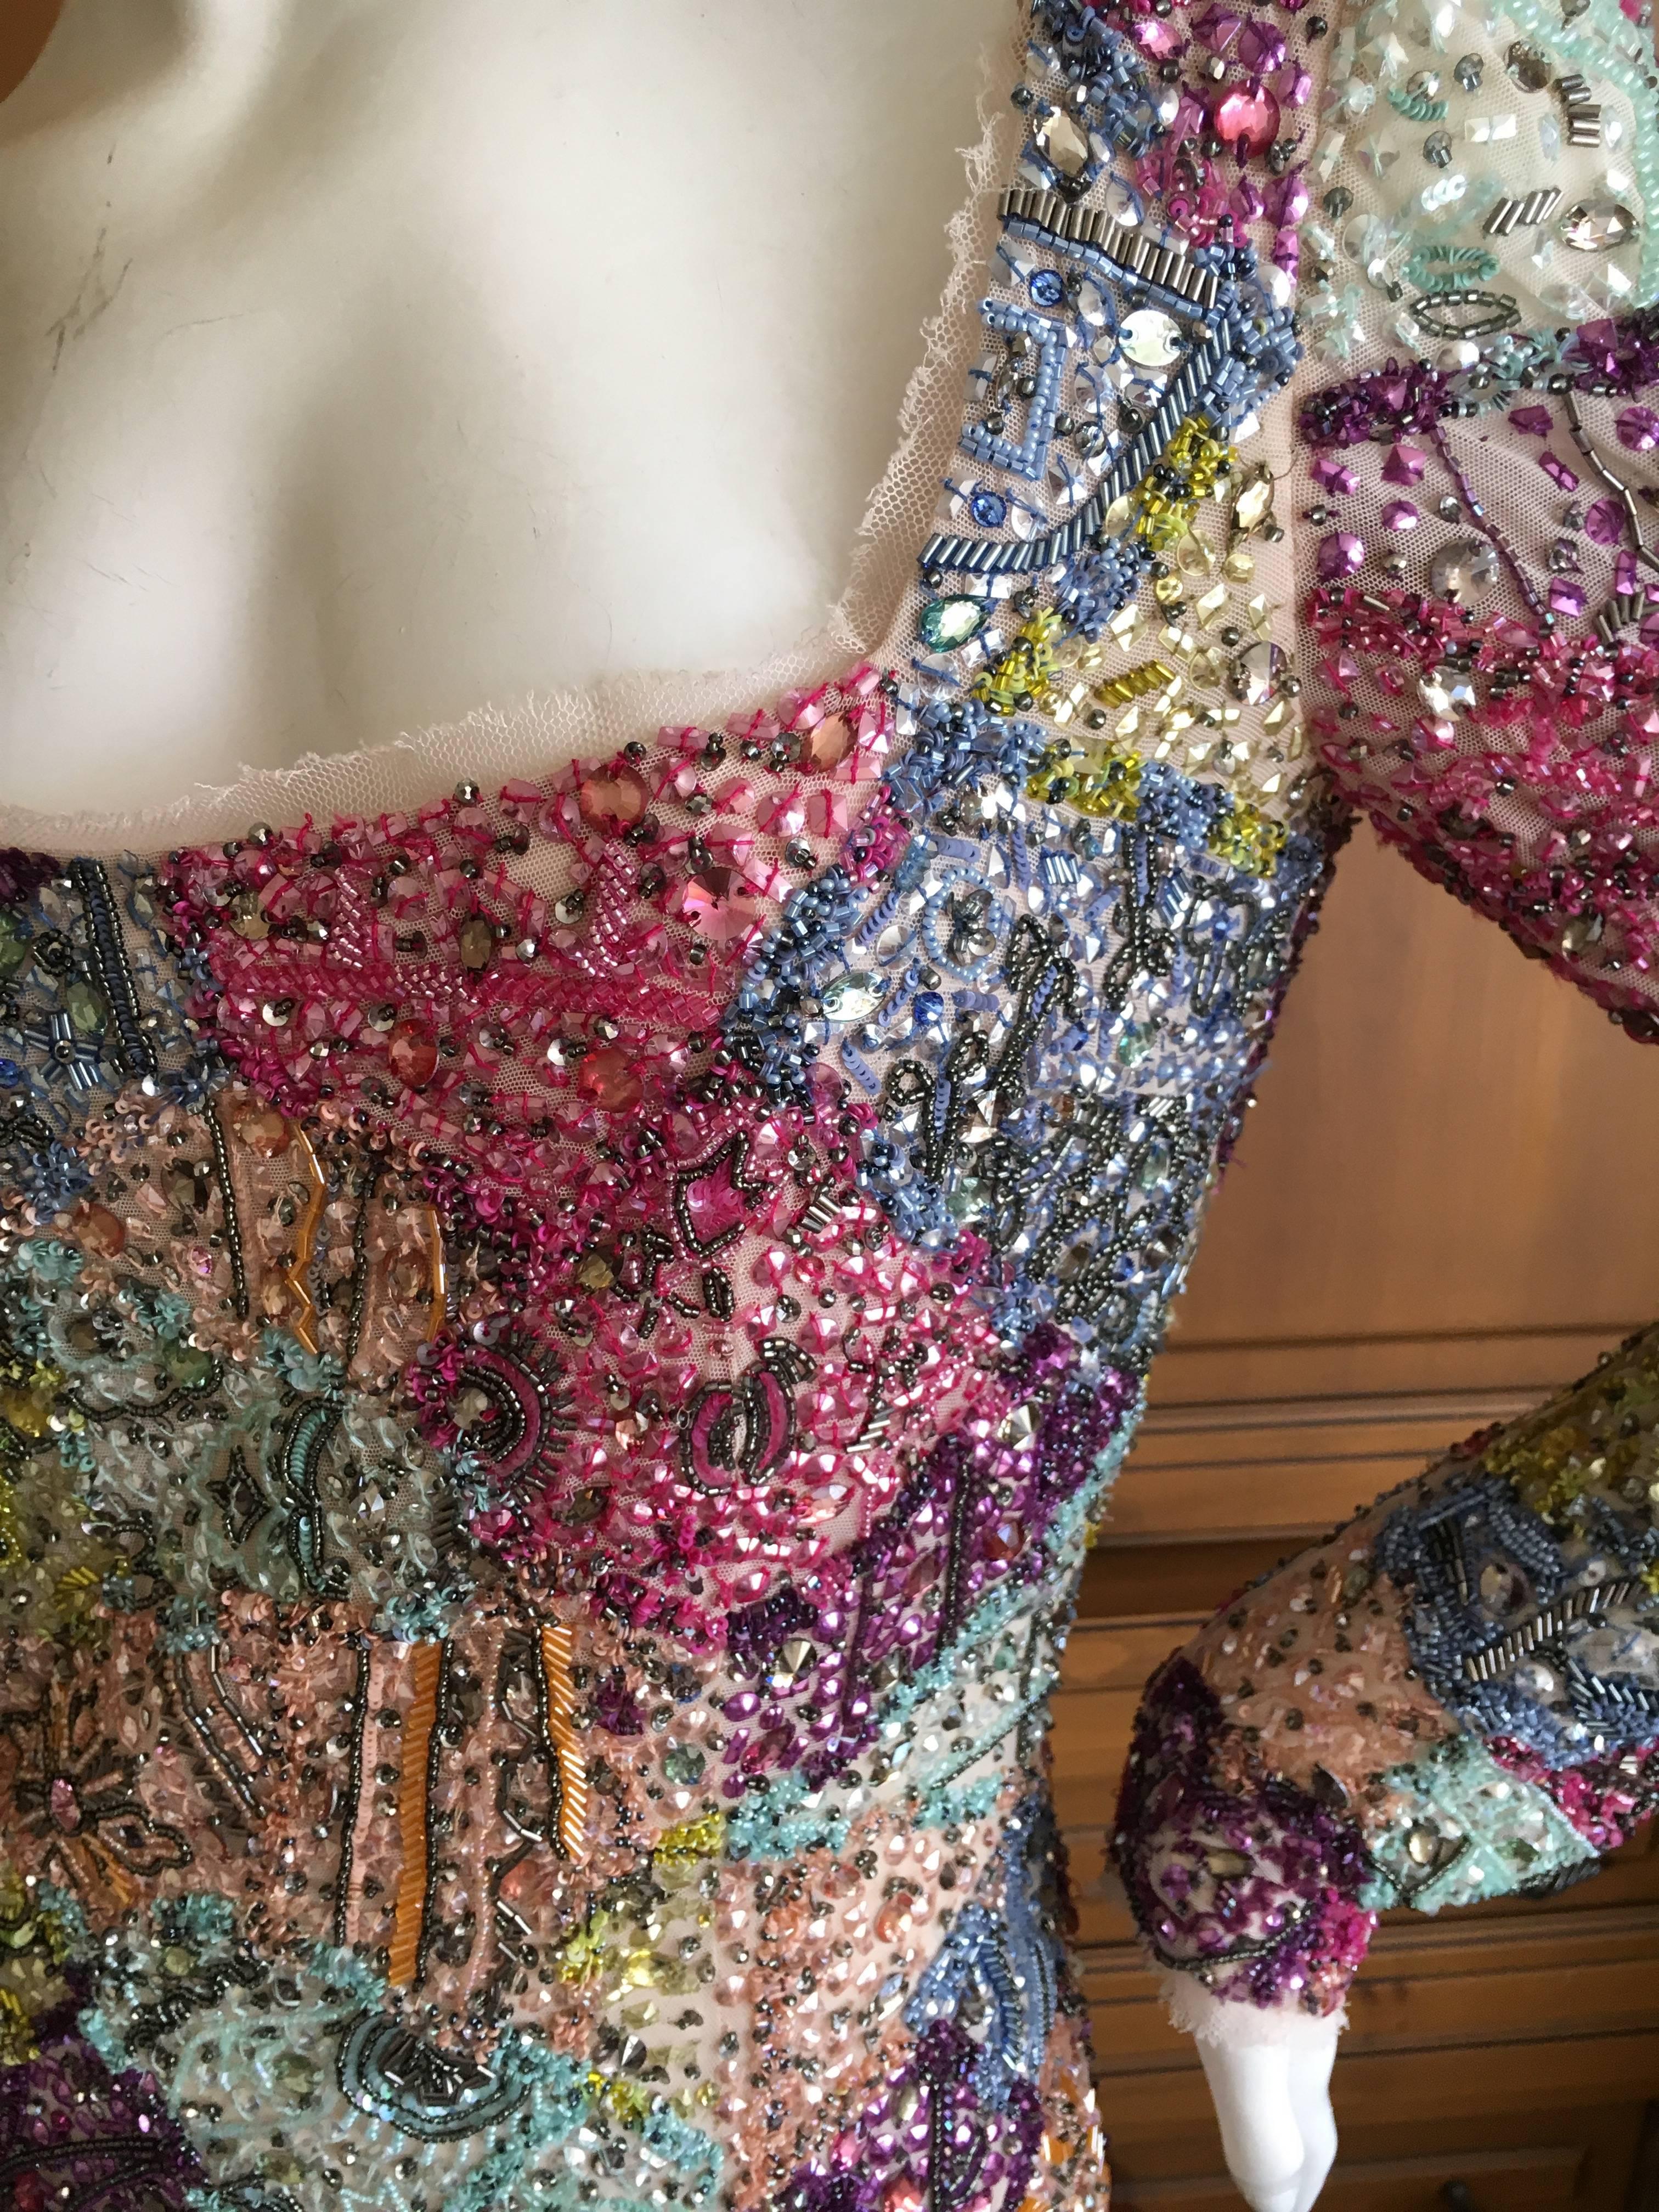 Emilio Pucci Bead Embellished Cocktail Dress In New Condition For Sale In Cloverdale, CA